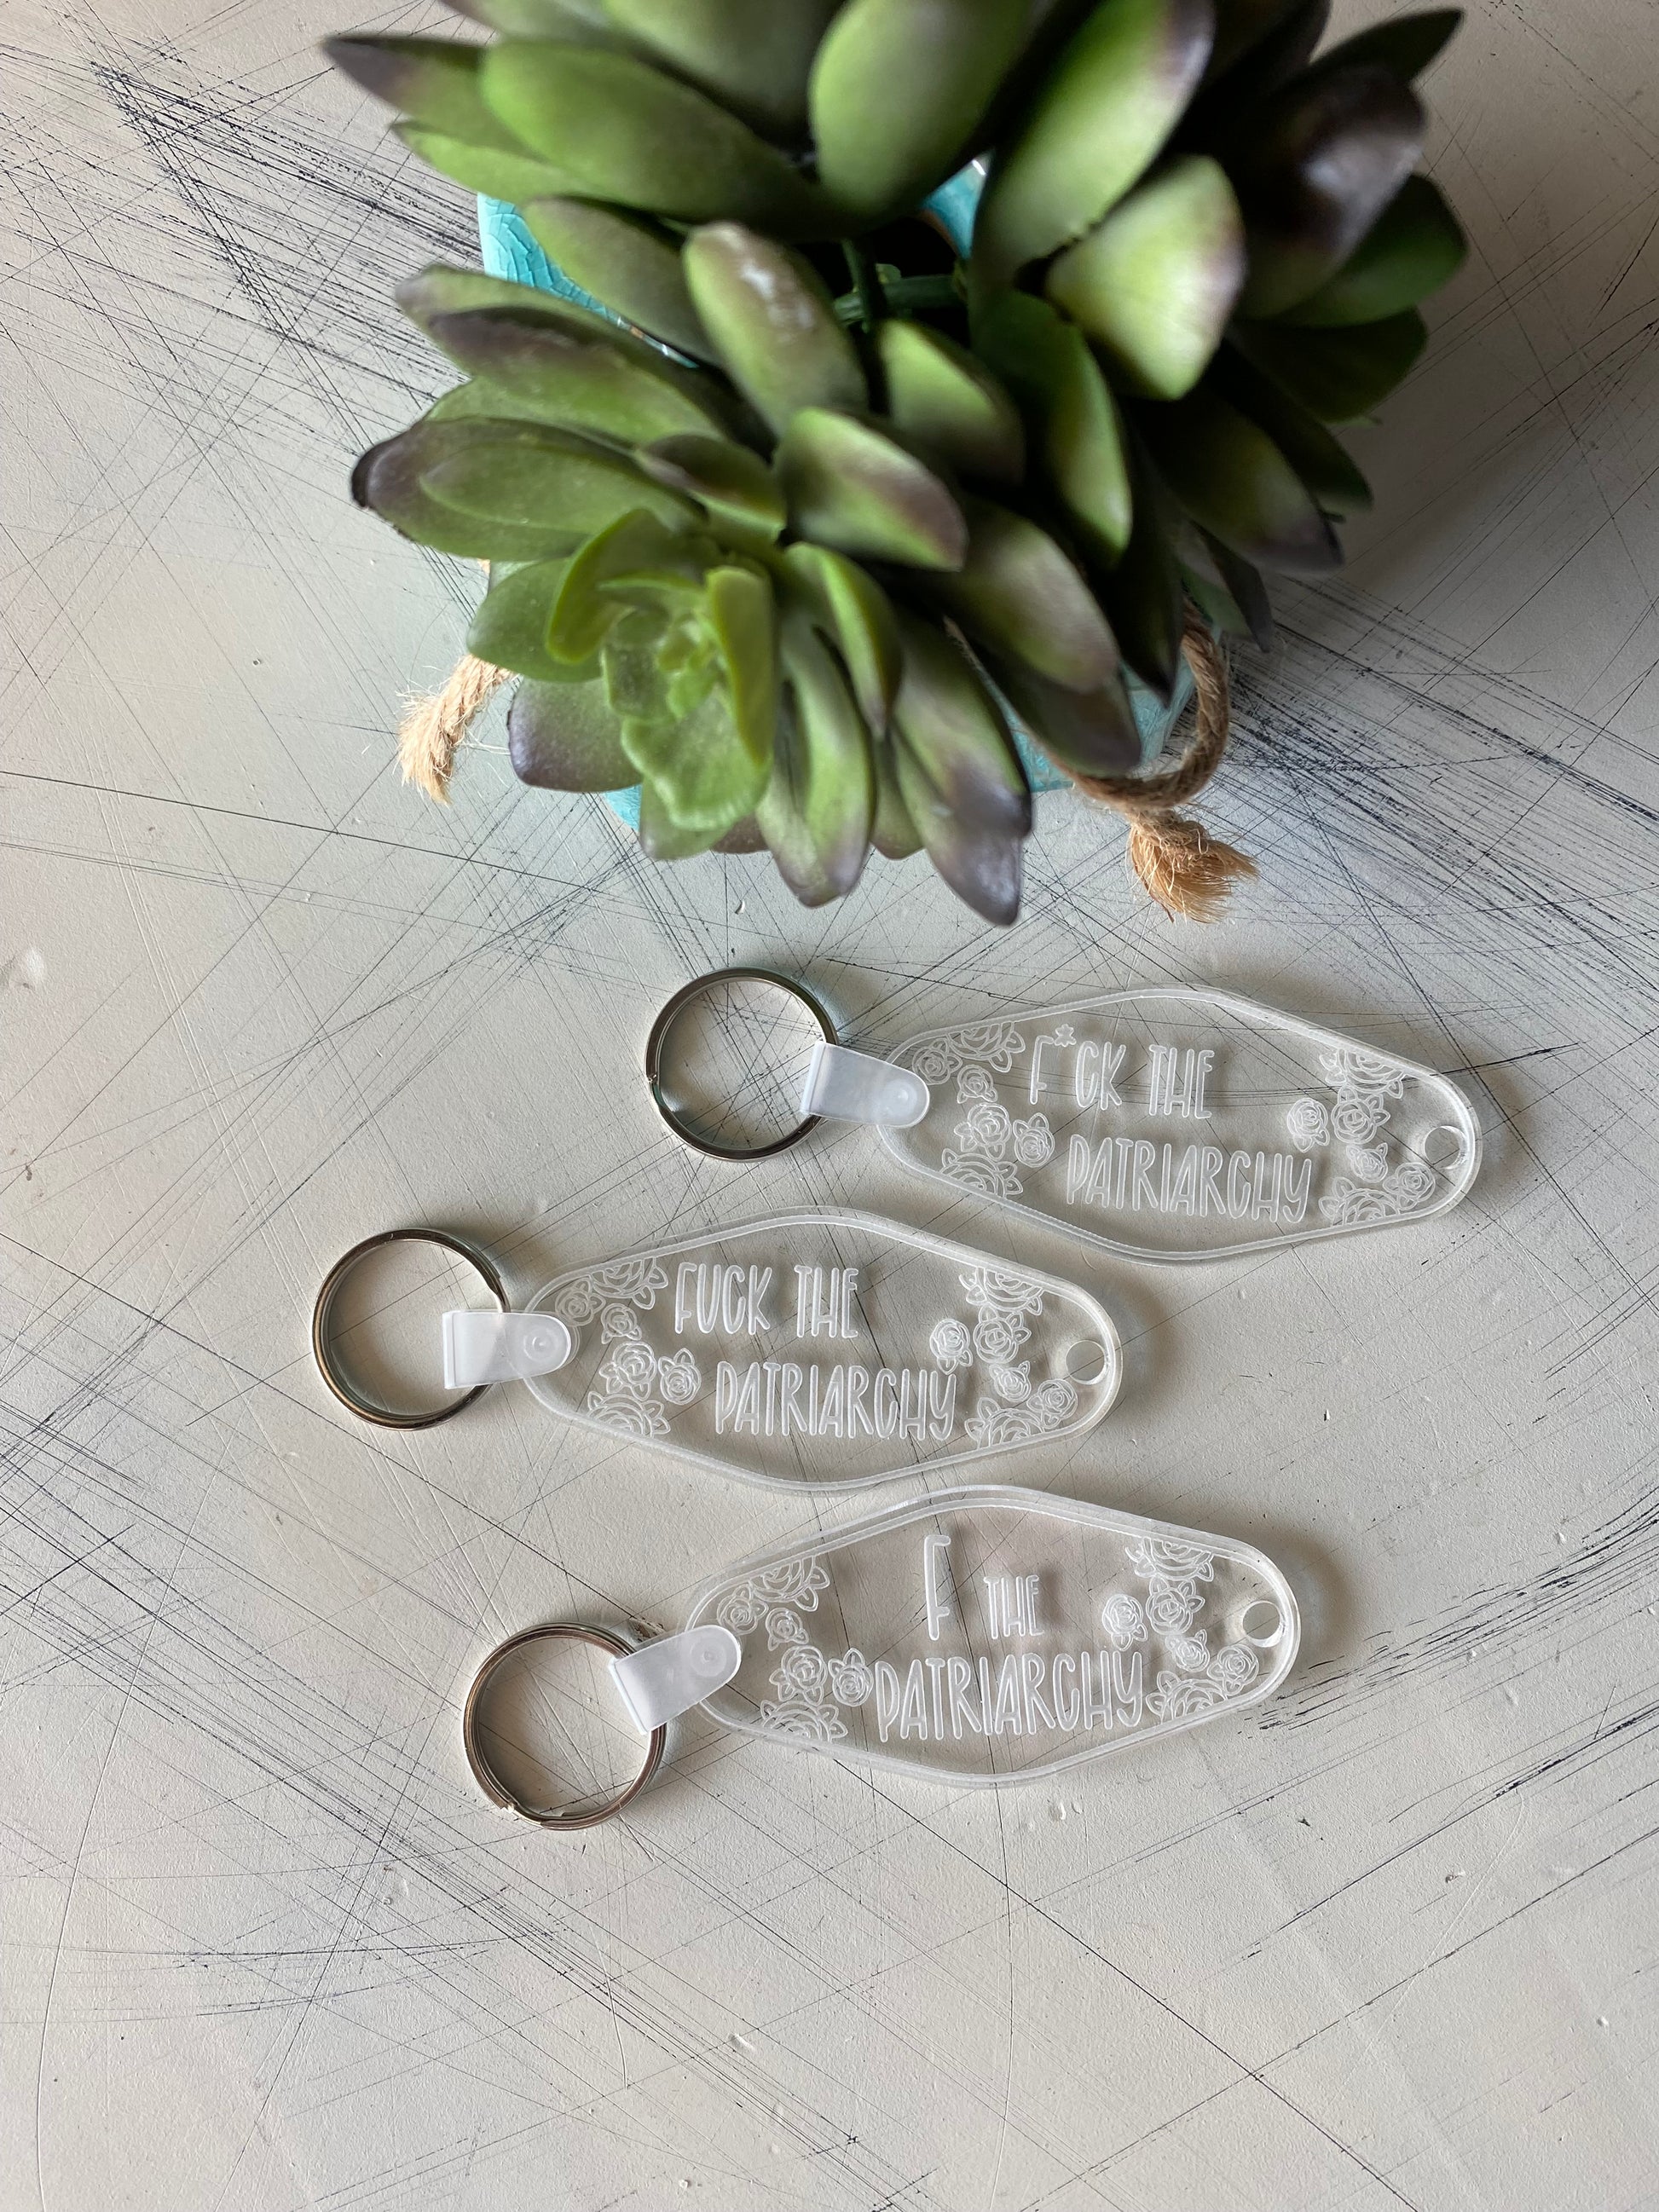 F the patriarchy - engraved clear acrylic motel style keychains - Novotny Designs